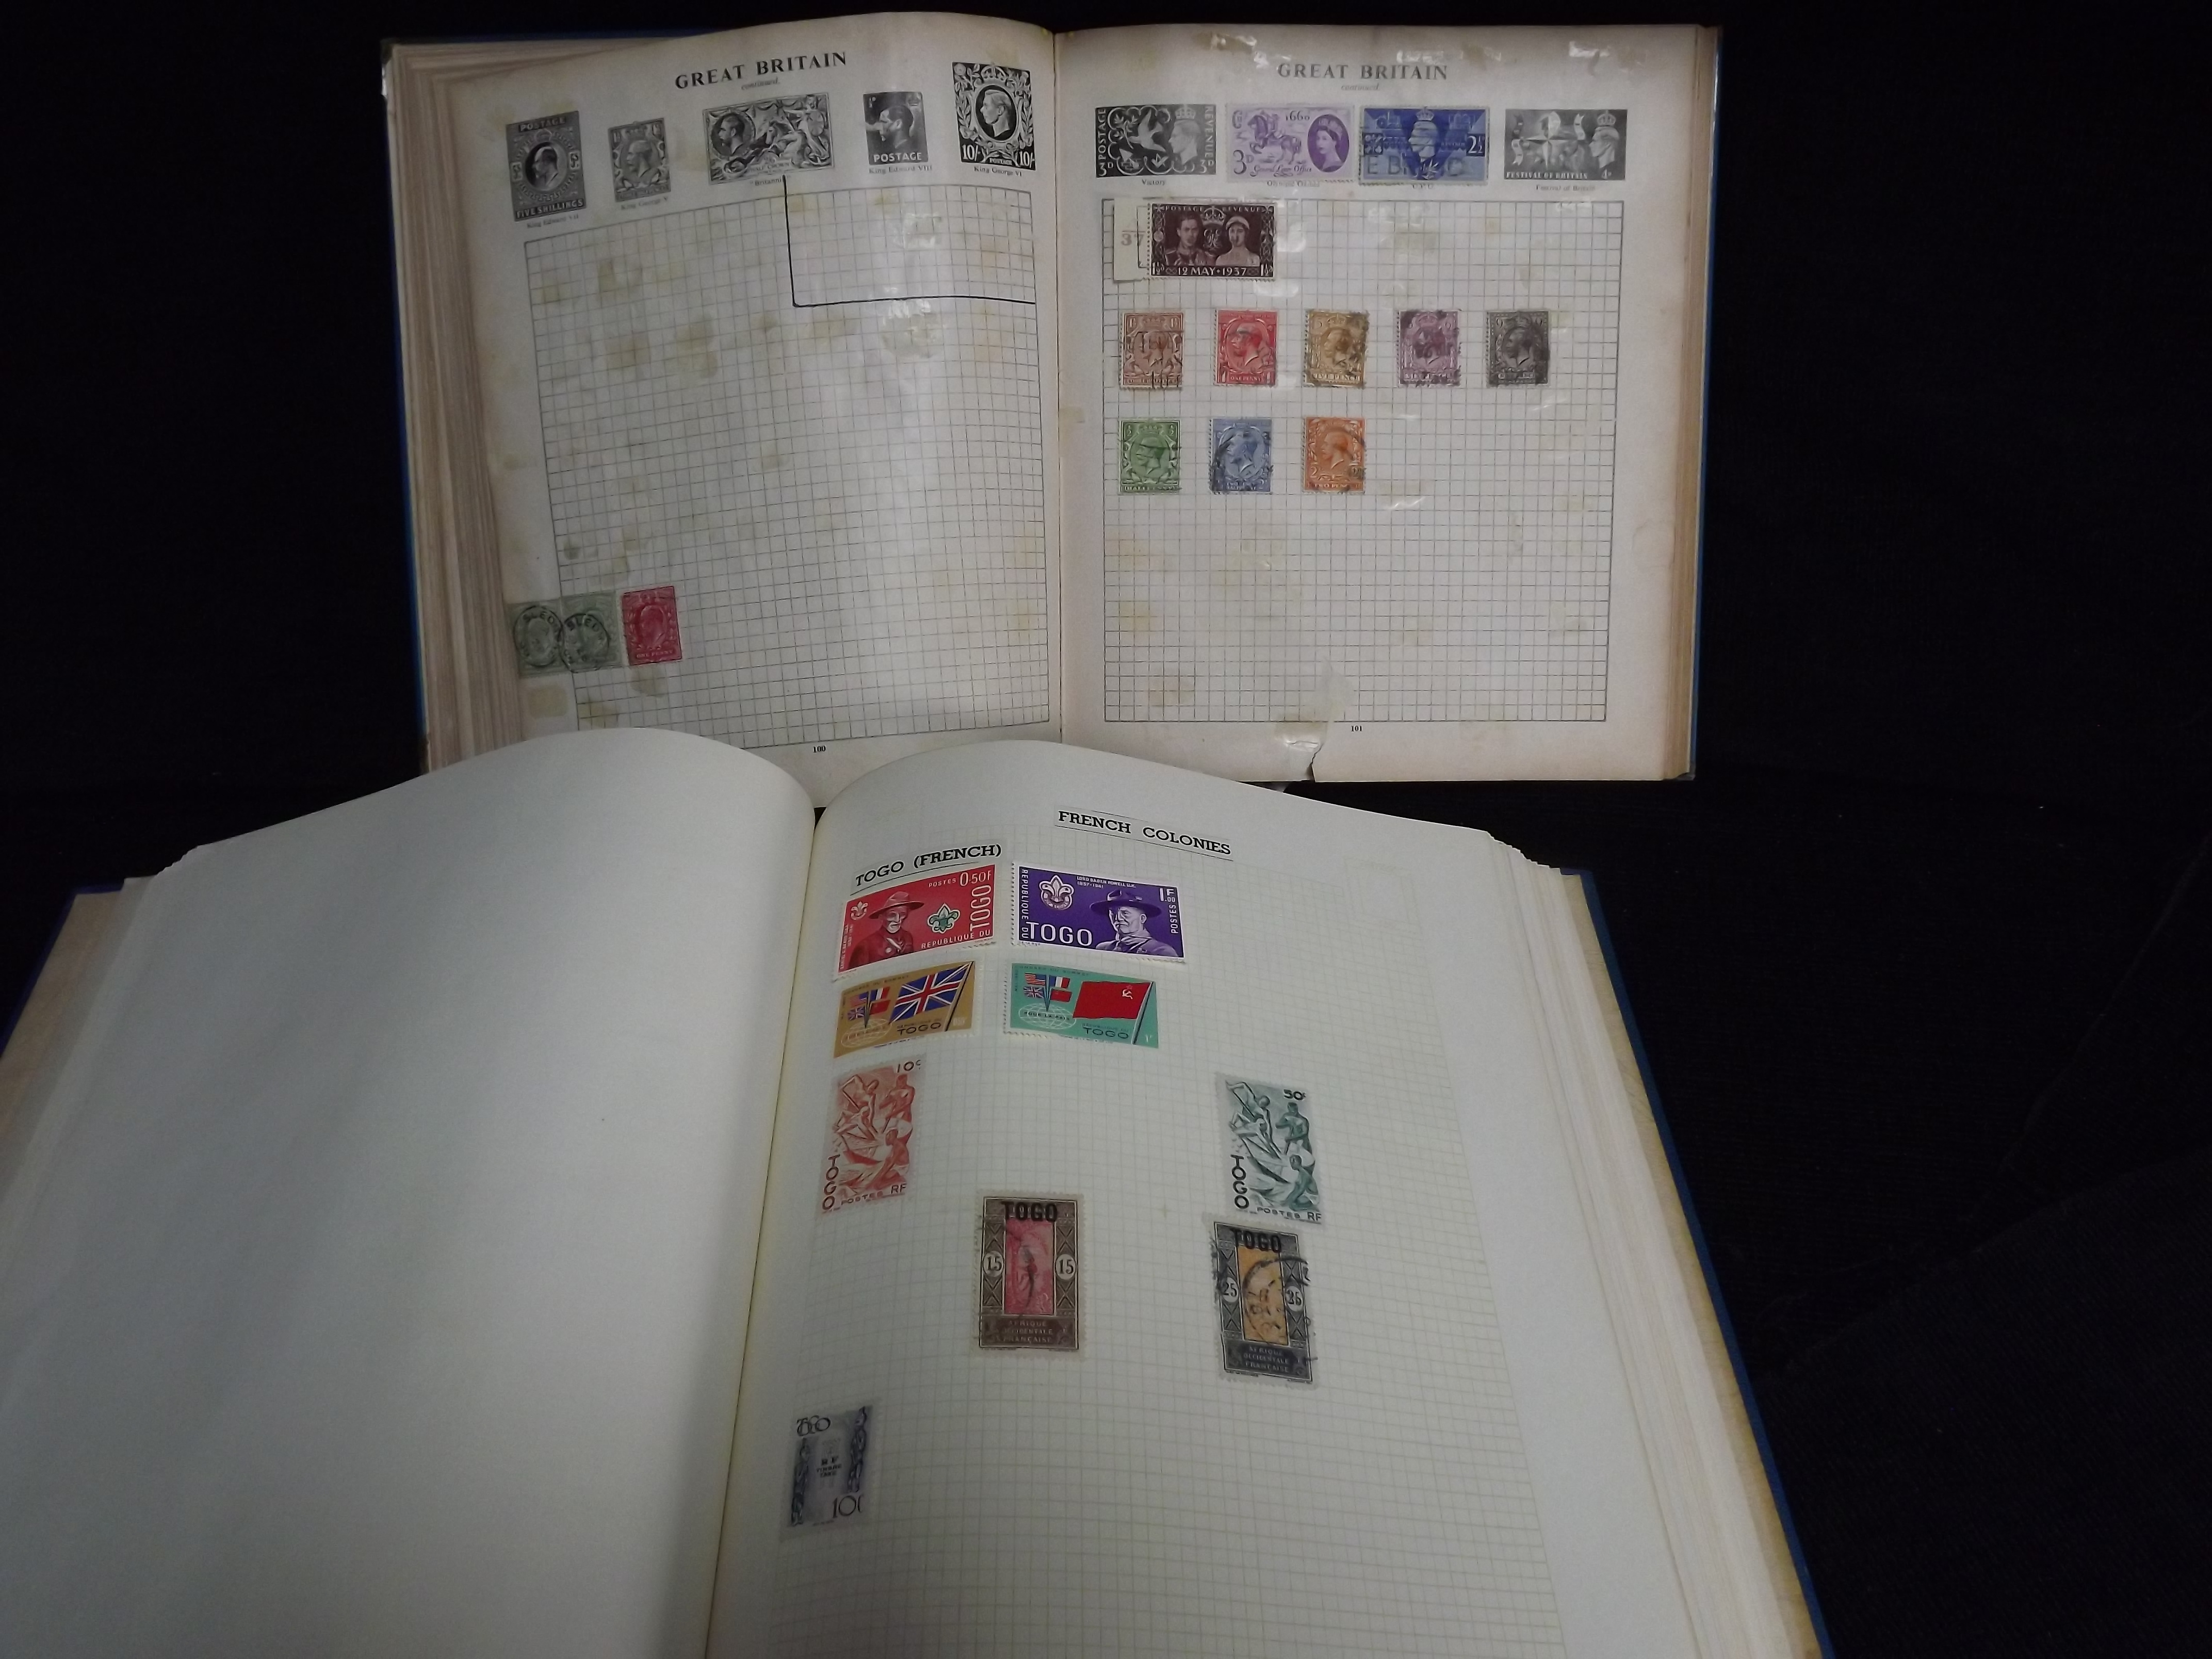 3 x Albums of World, GB and Commonwealth Stamps. Report - Mixed mint and used collection housed in a - Image 28 of 65